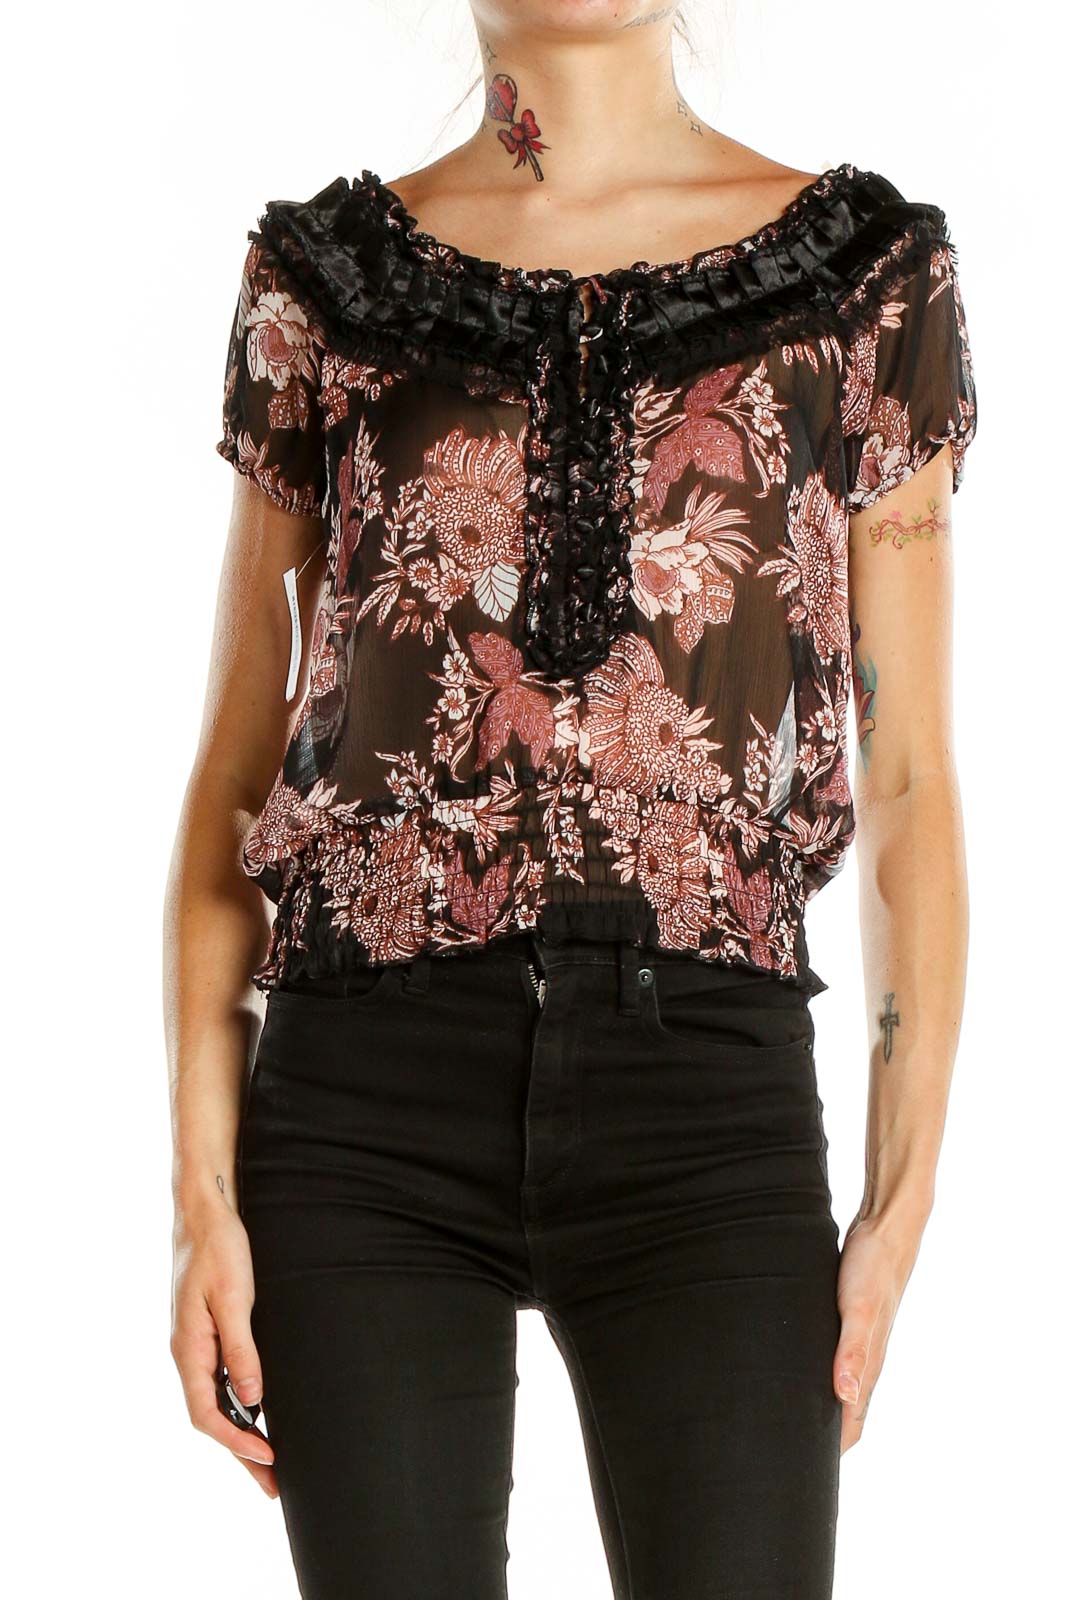 Brown Floral Print Ruffle Blouse Front